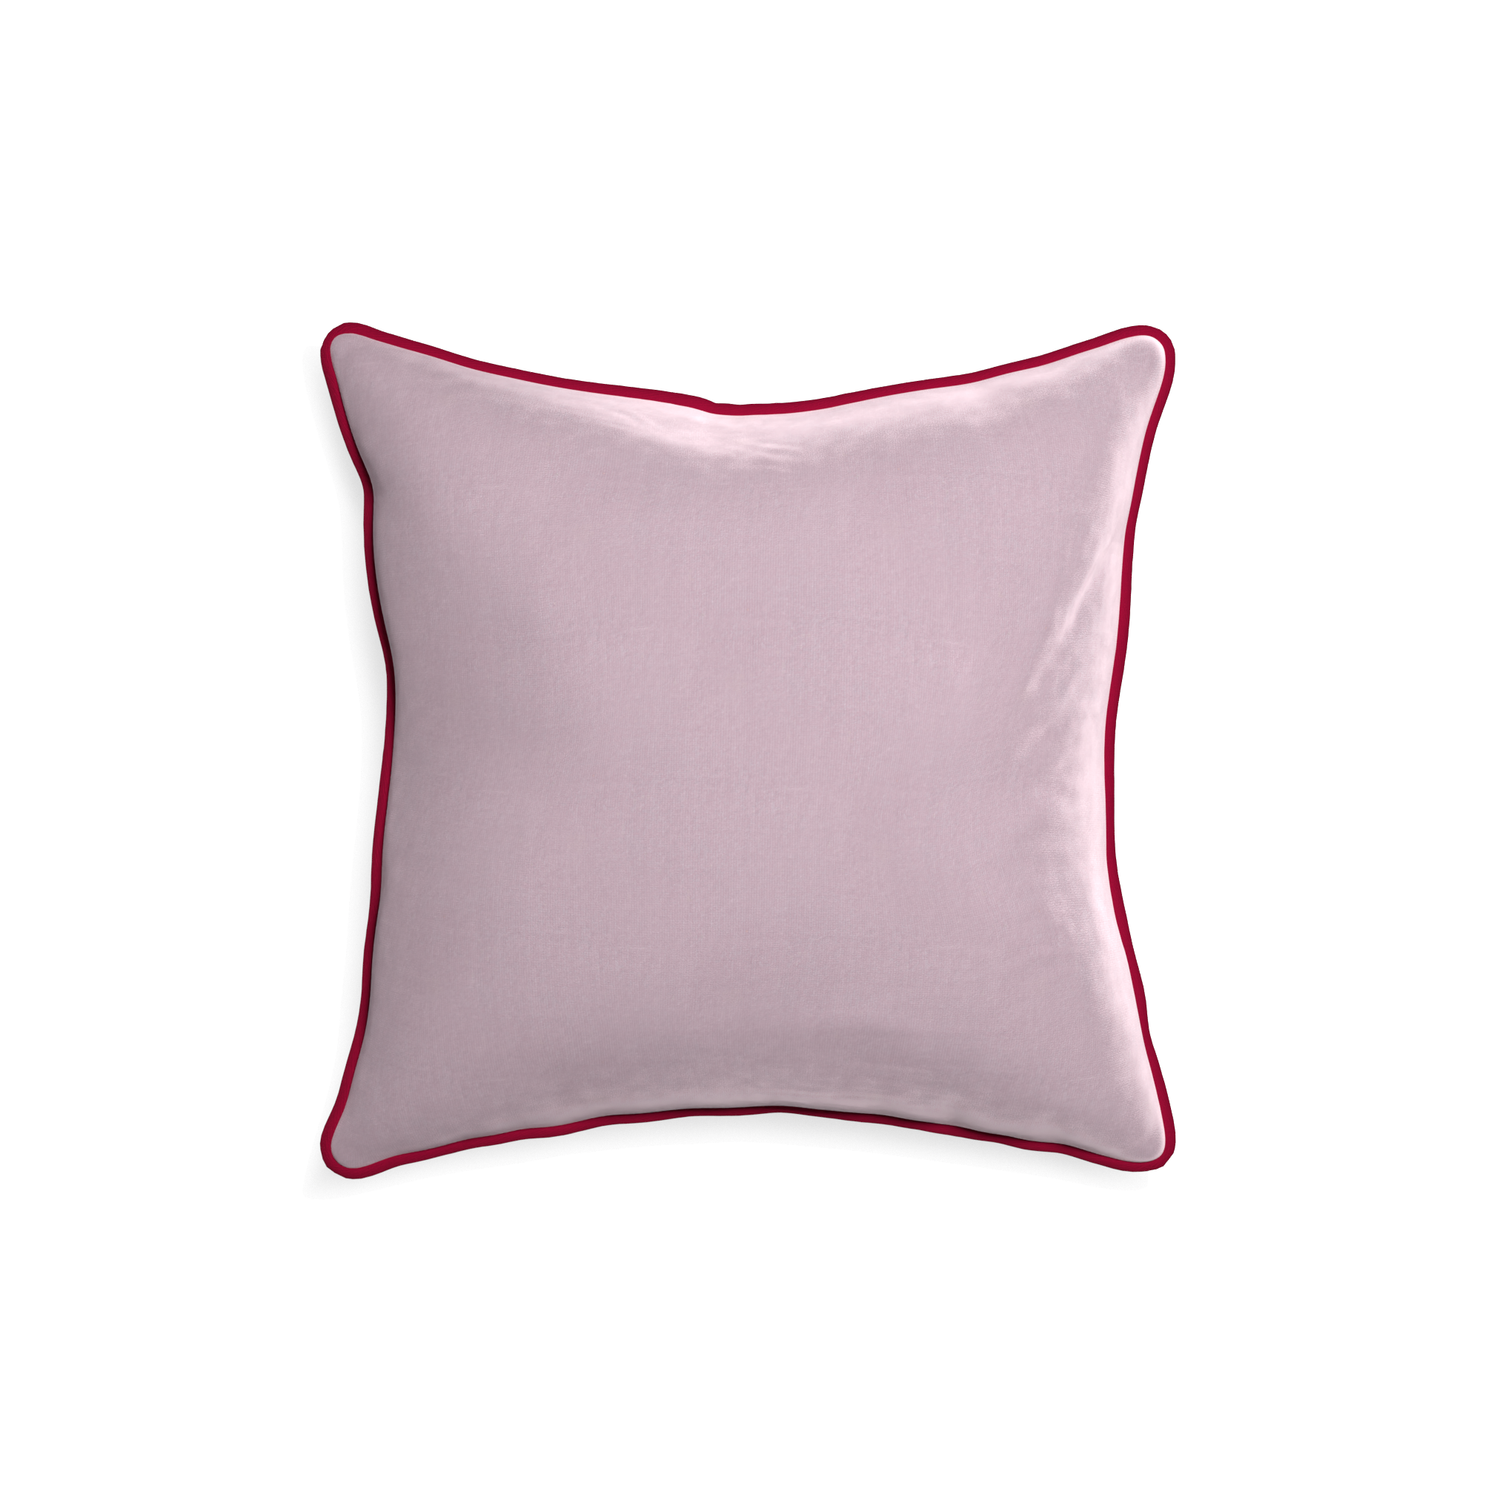 18-square lilac velvet custom pillow with raspberry piping on white background